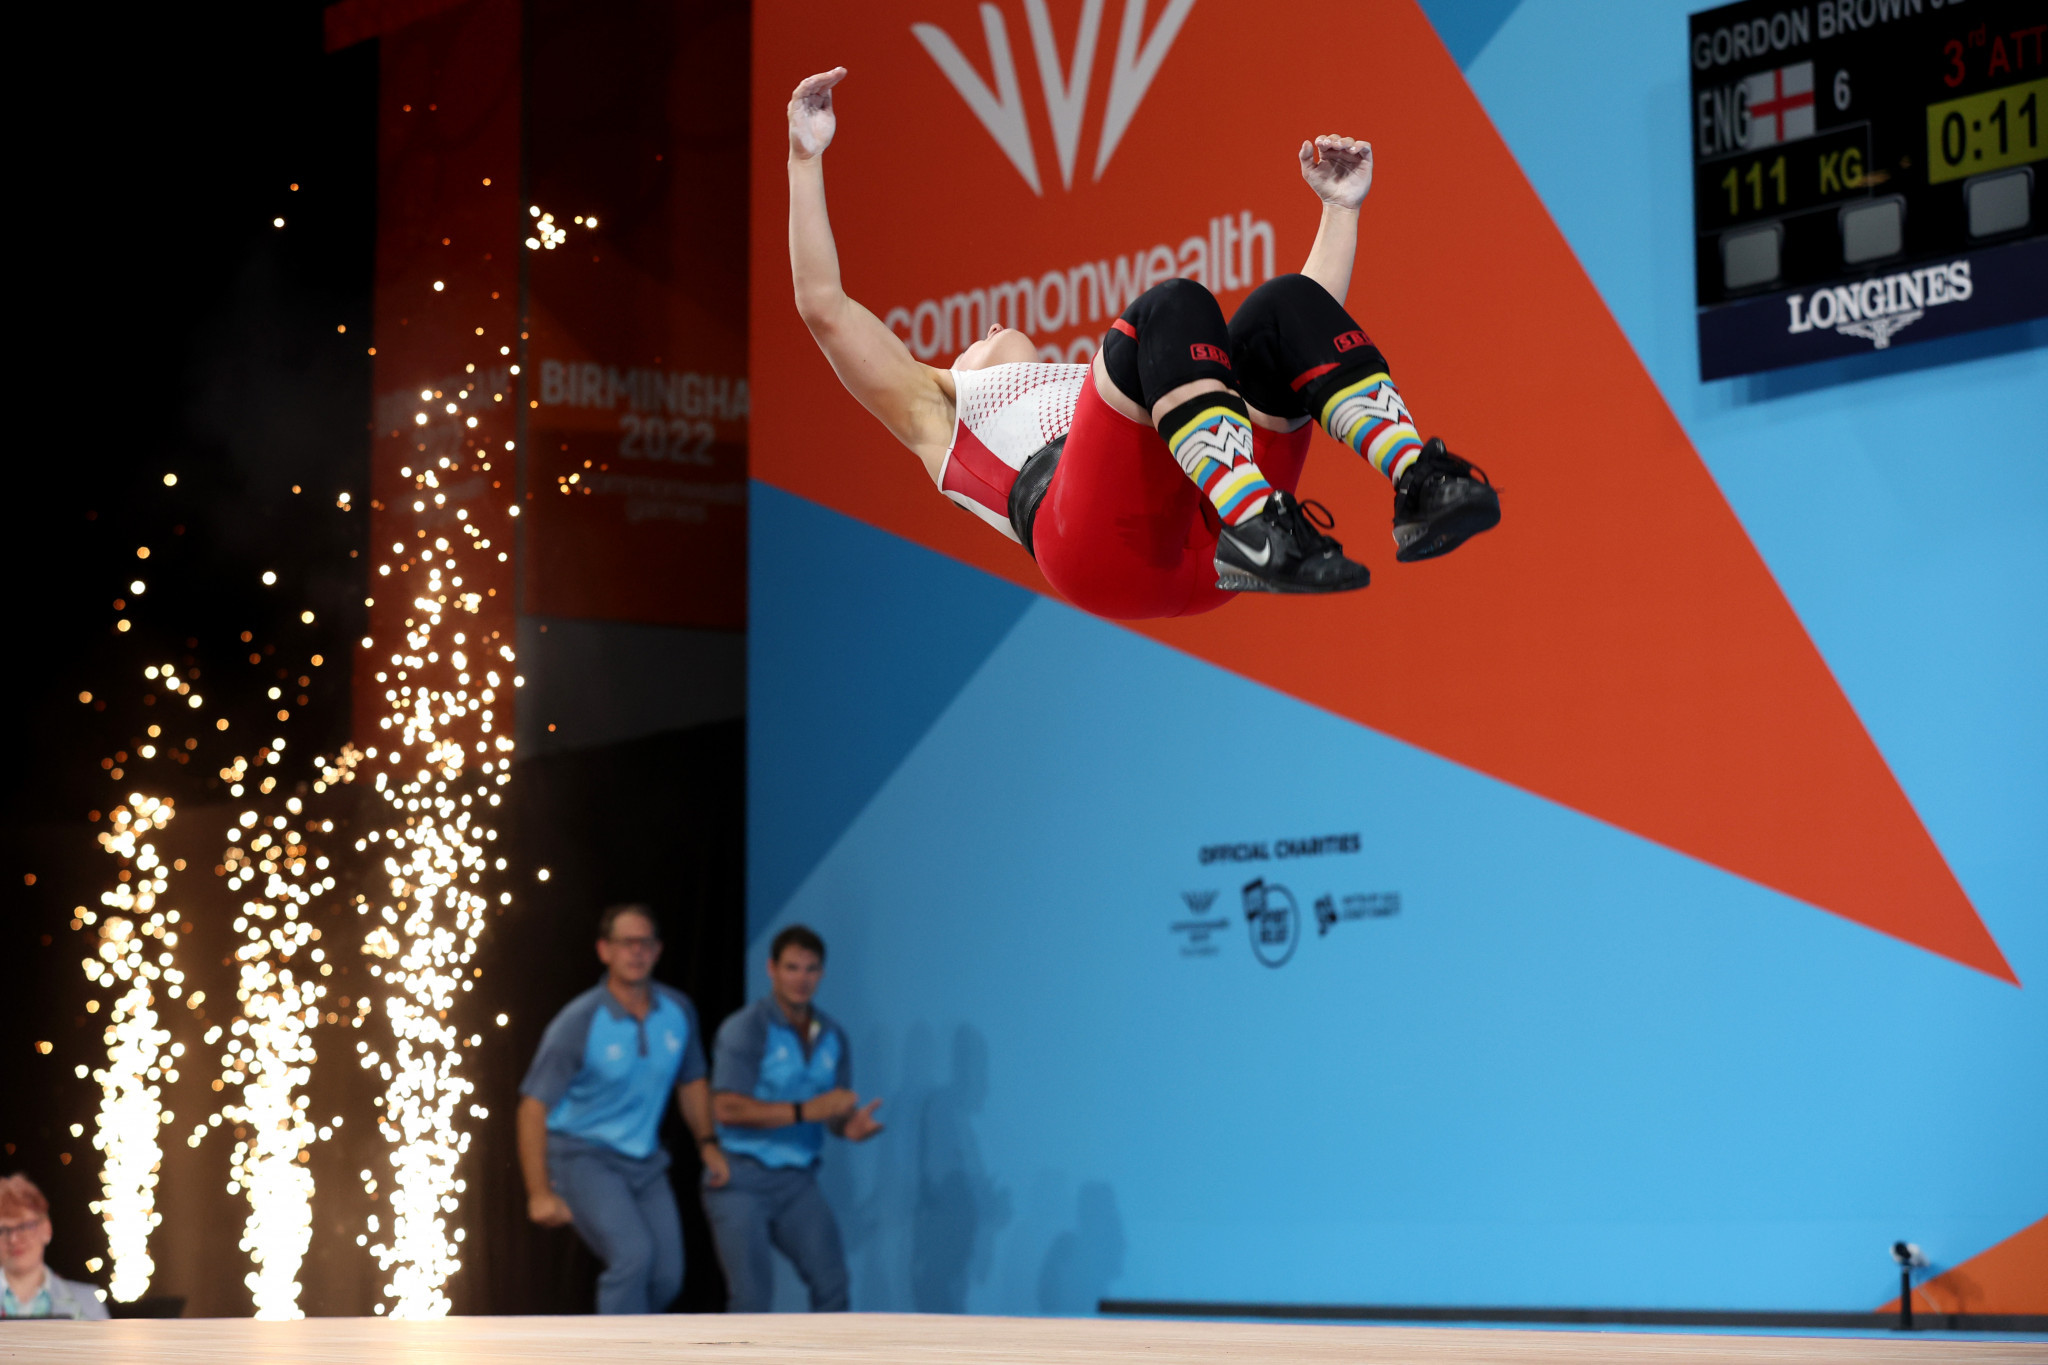 England's Jess Gordon Brown, in Wonder Woman socks, celebrated her silver medal with a backflip ©Getty Images